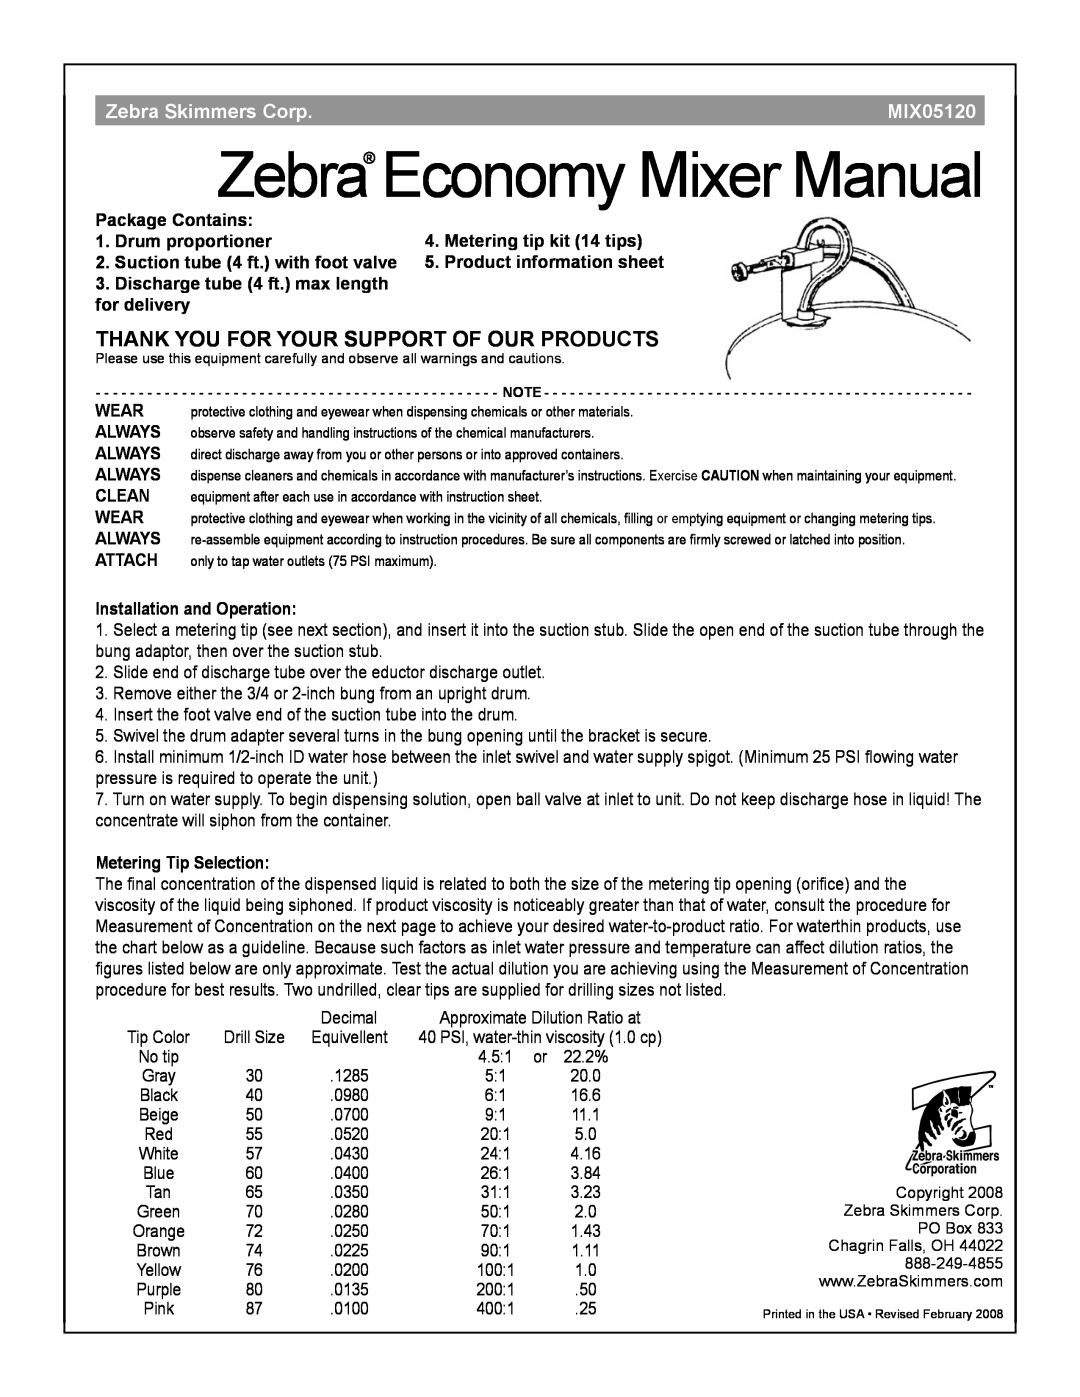 Zebra Technologies MIX05120 instruction sheet Thank You For Your Support Of Our Products, Zebra Economy Mixer Manual 